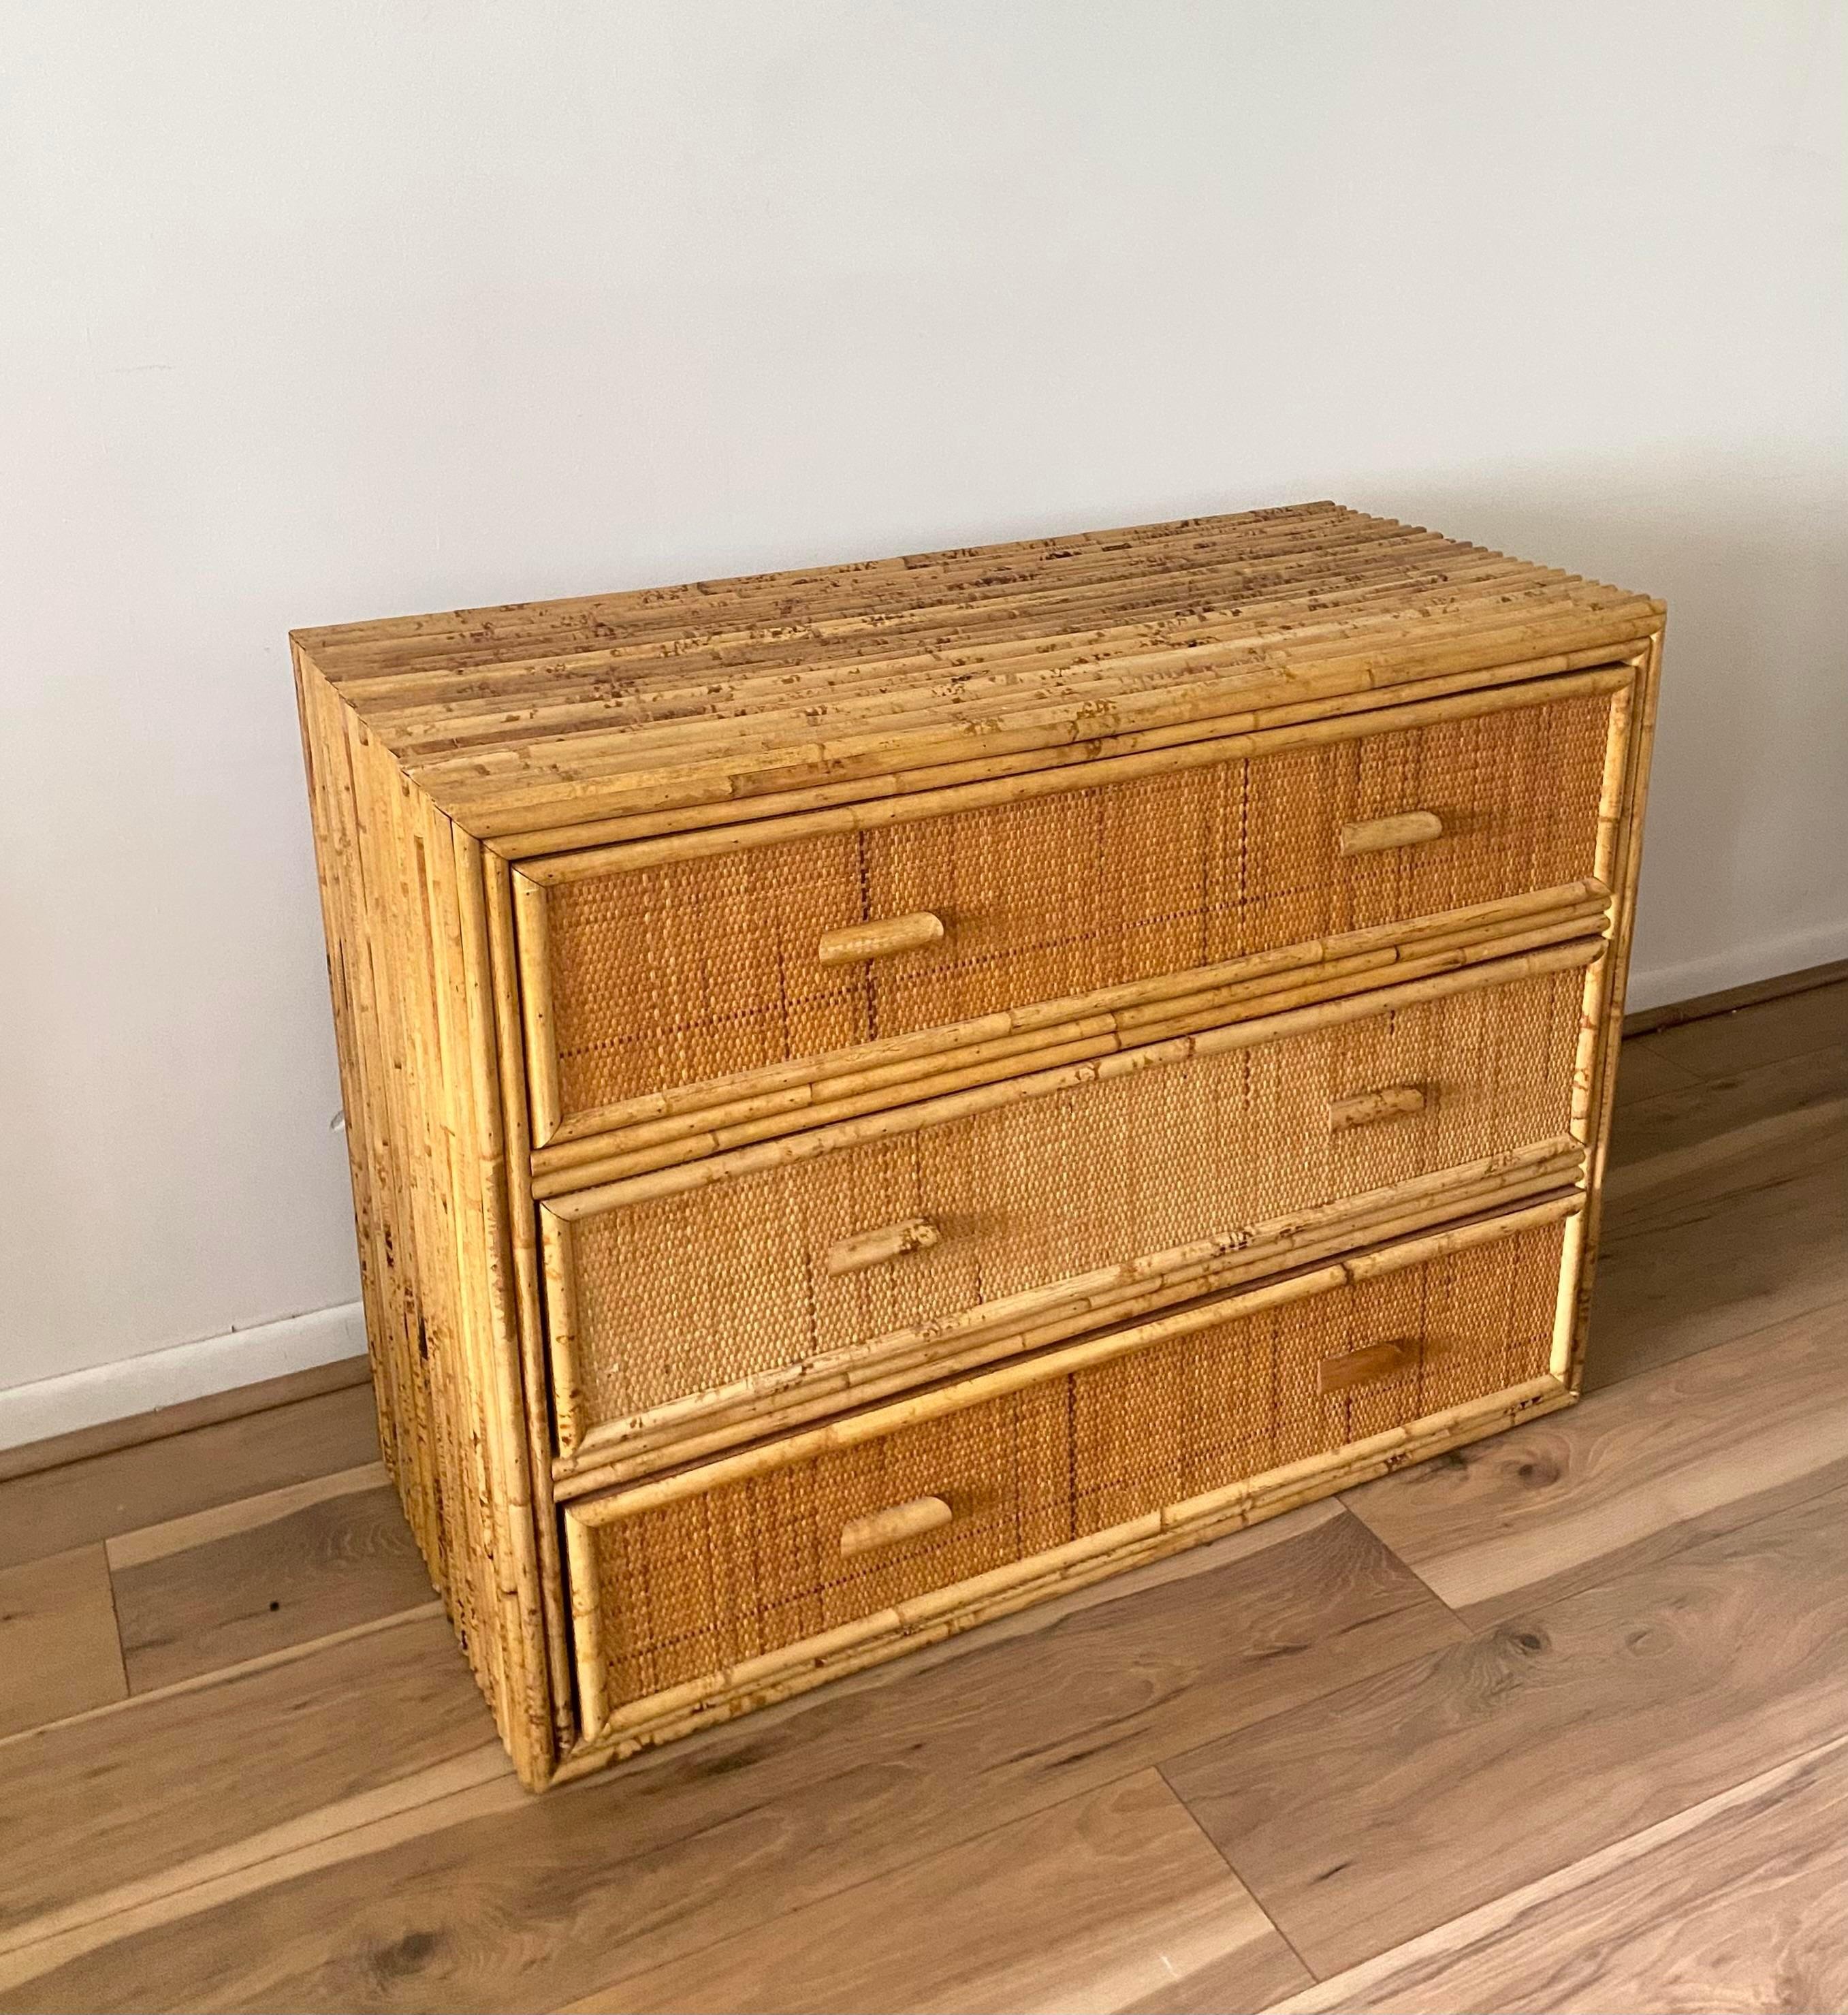 This Dresser is a charming addition to any home. The delicate wicker design adds a touch of coastal-inspired style to any room while providing ample storage space with 3 large drawers. A beautiful and functional piece of furniture that will